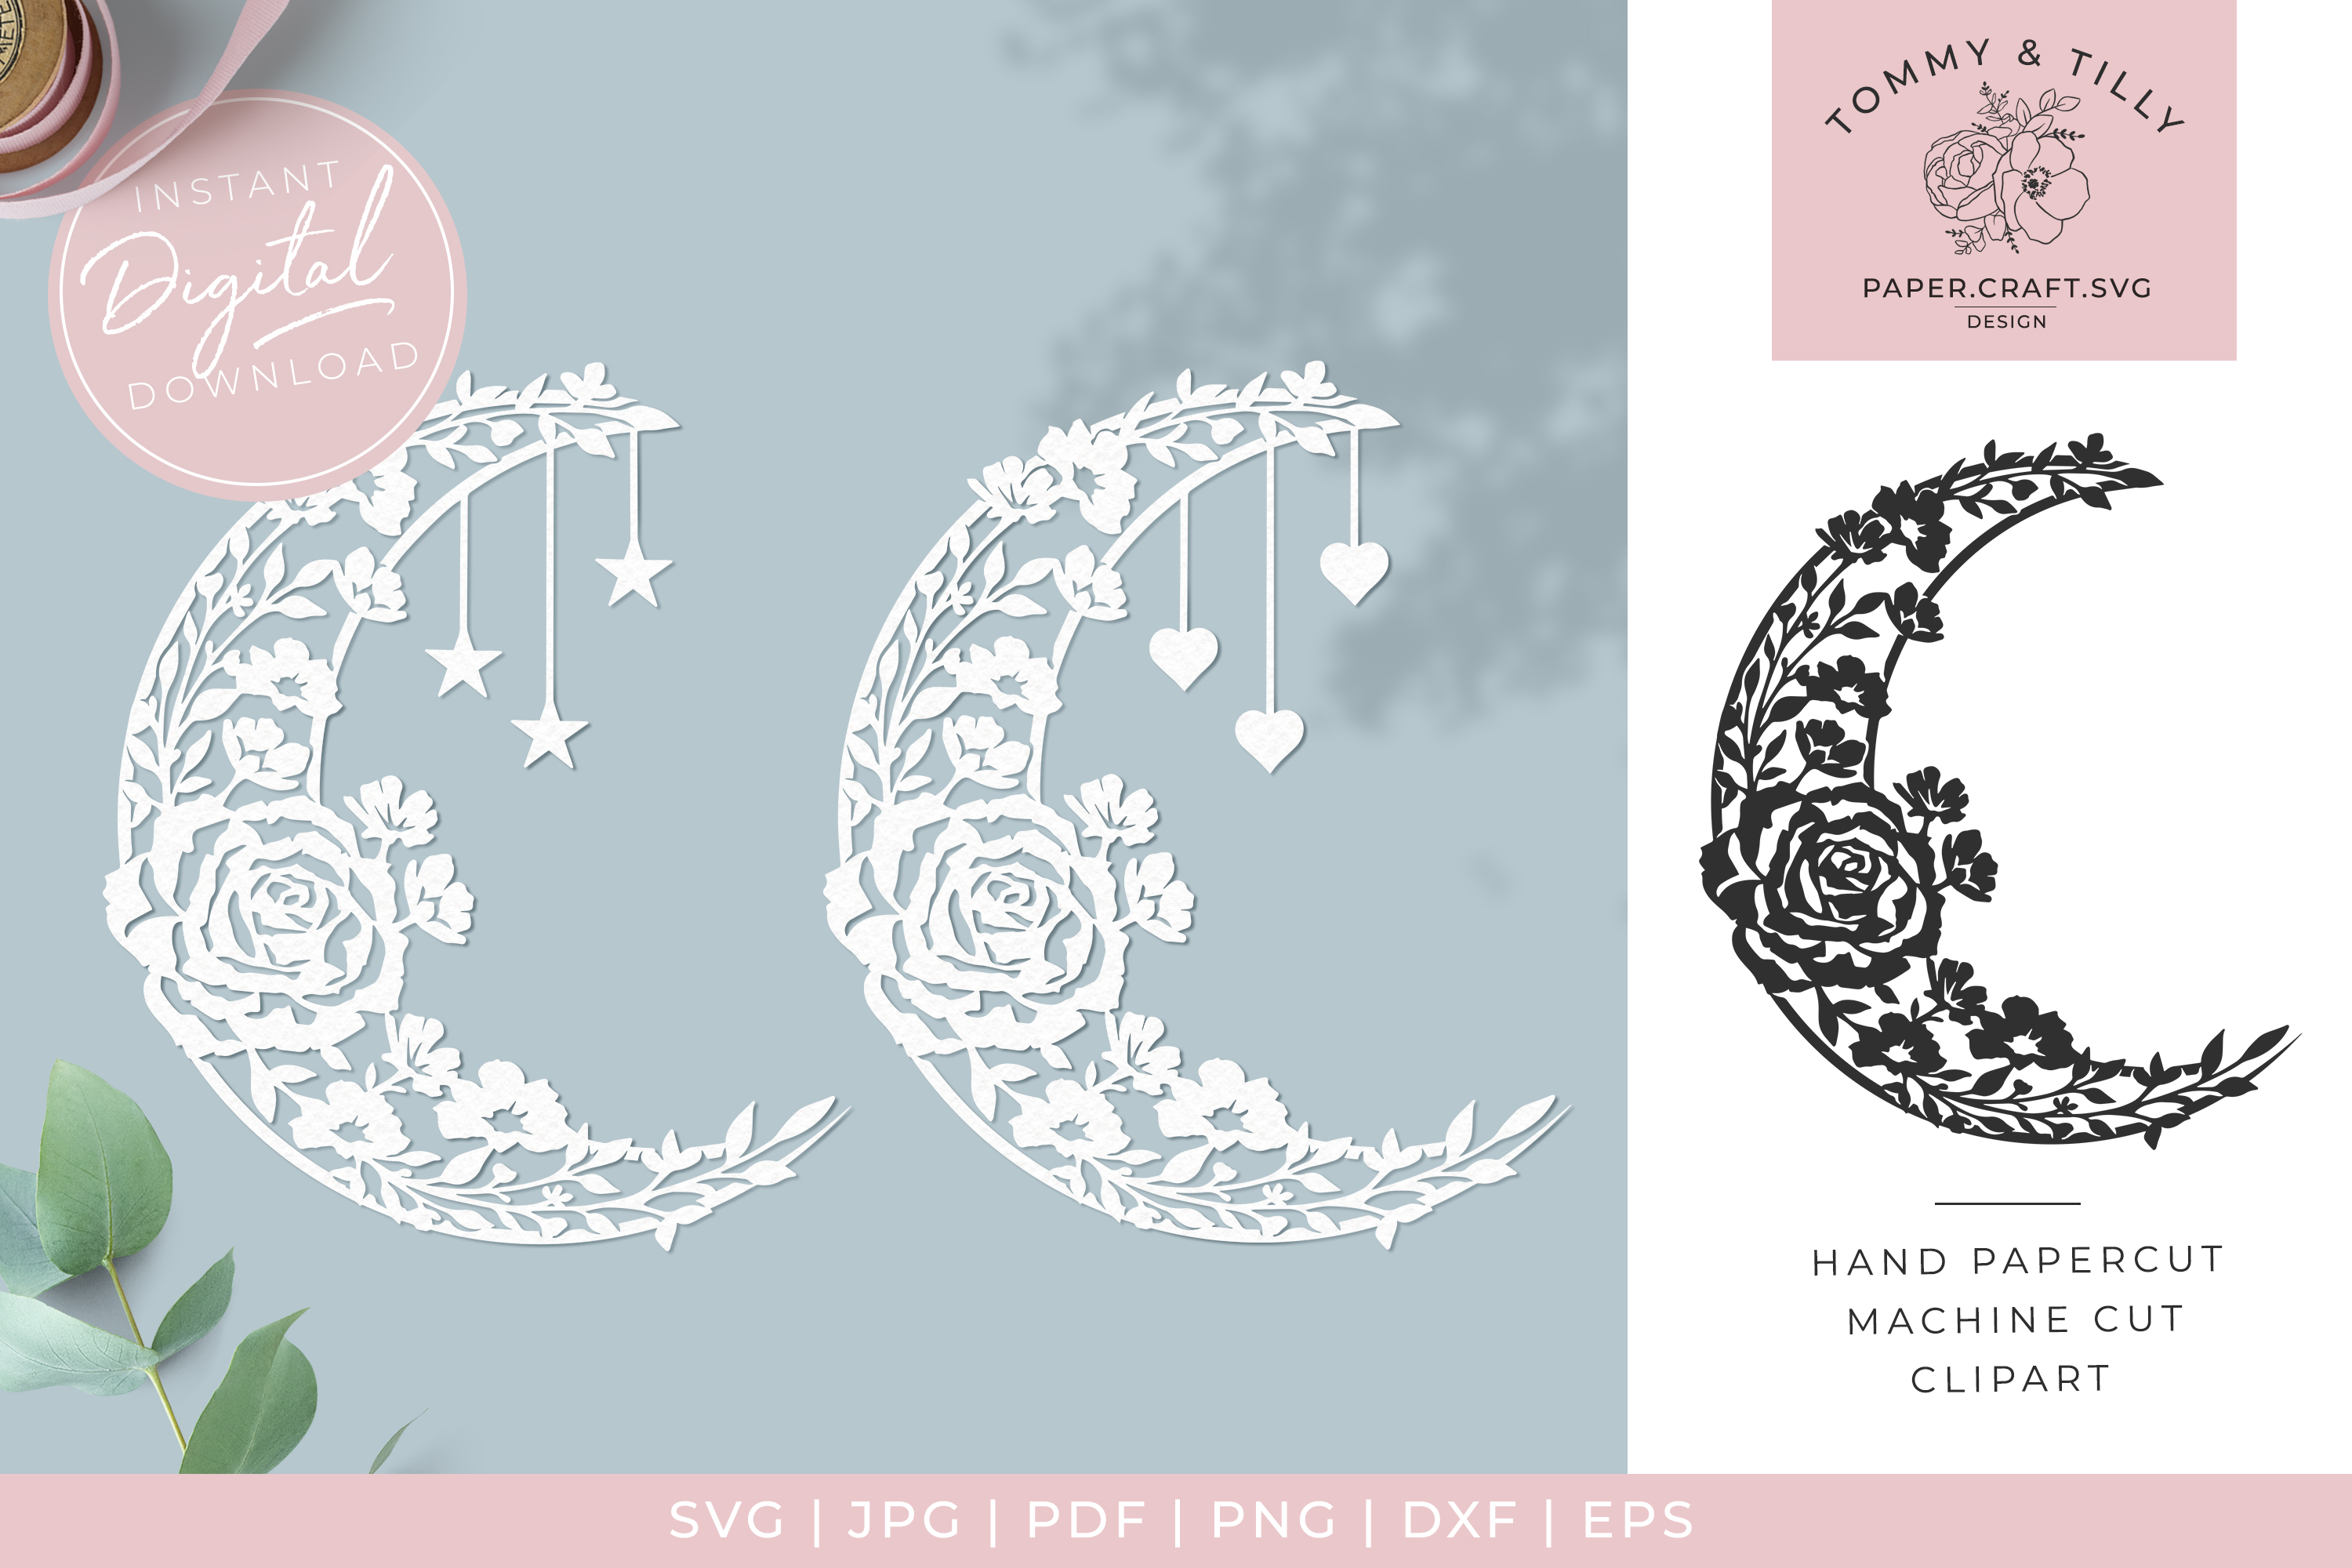 Download Floral Moons x 3 - SVG DXF PNG EPS JPG PDF Cutting